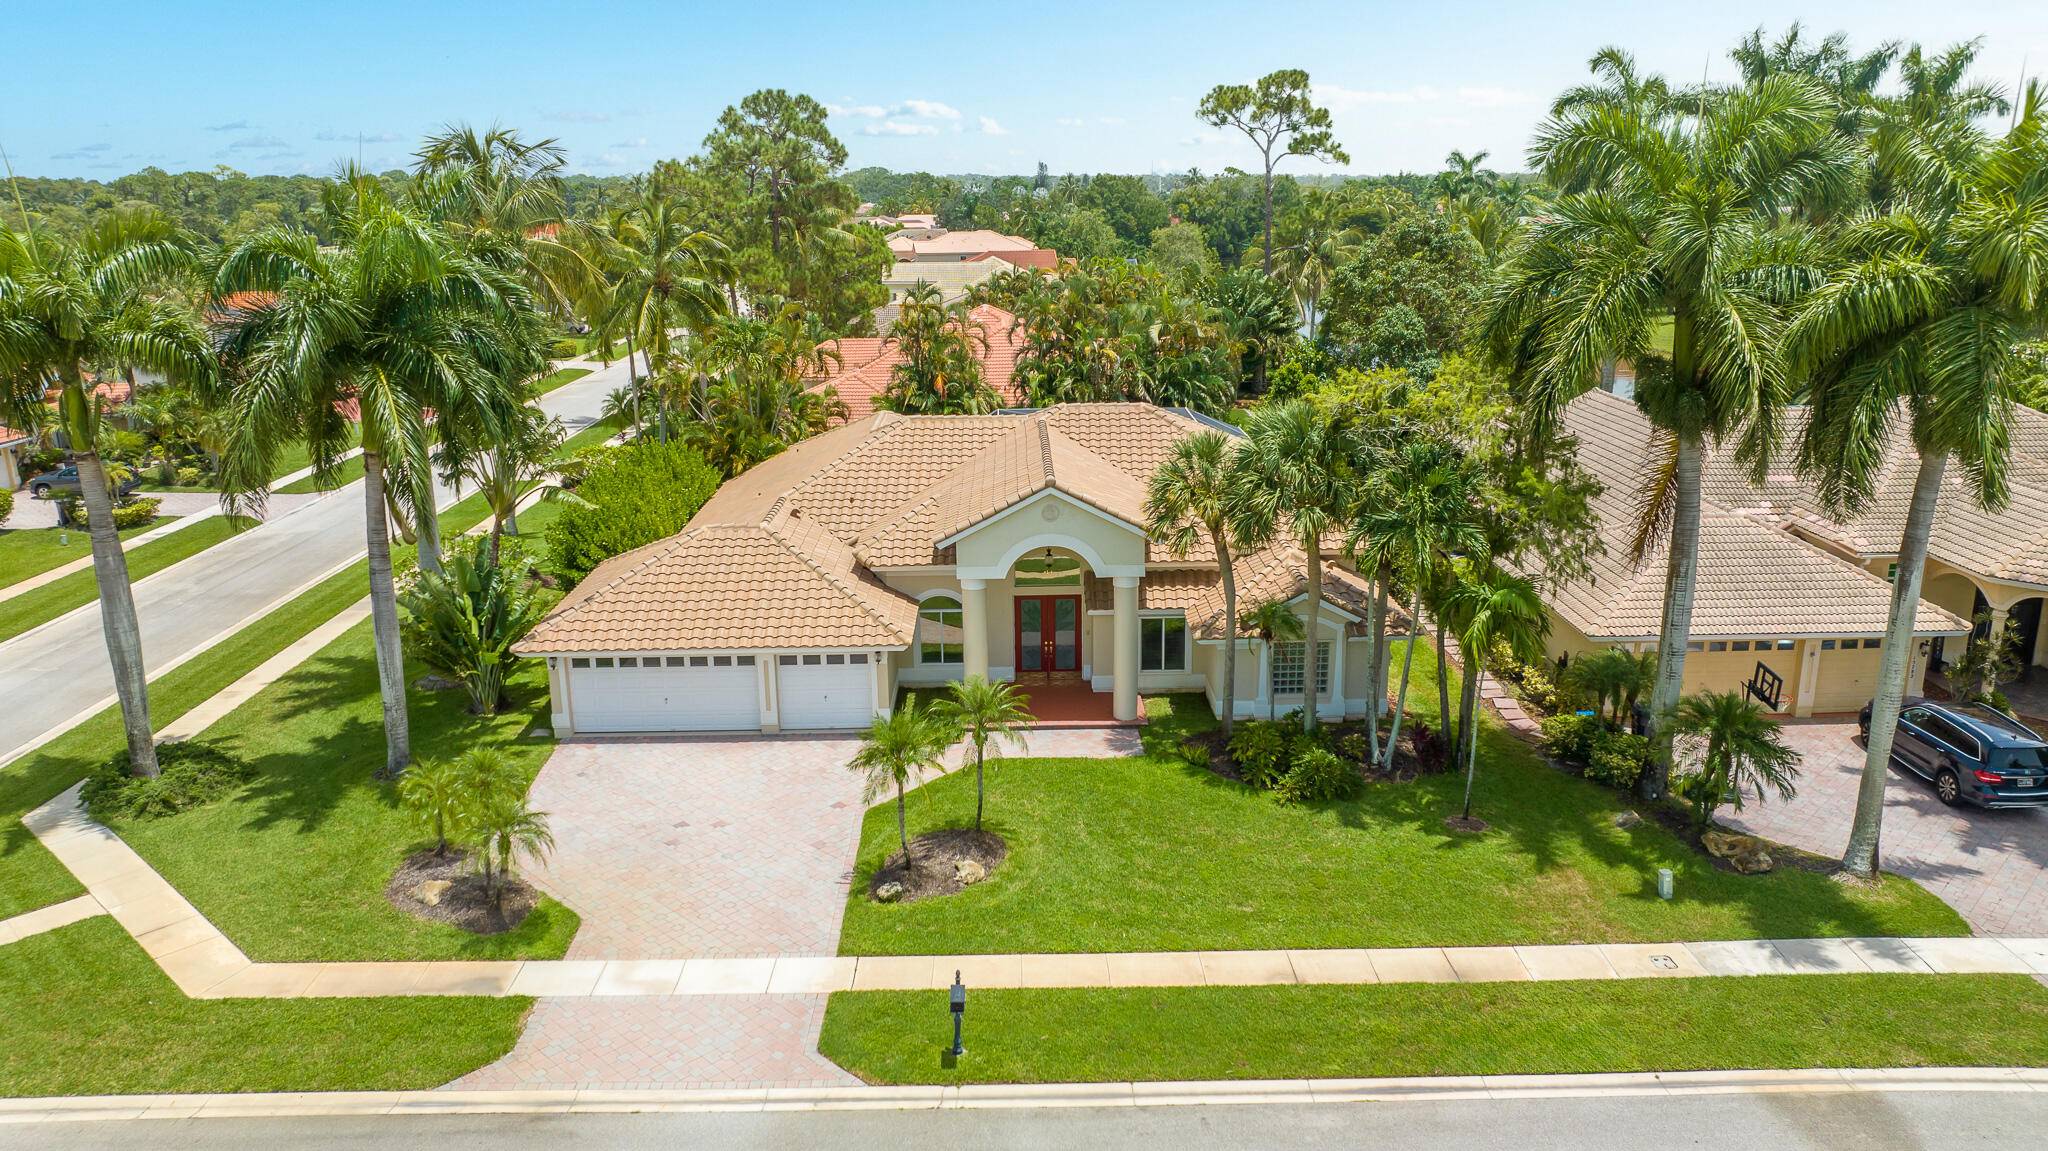 Welcome to ''The Preserve'' of Binks Forest Landings, one of the most premiere gated communities in Wellington, Florida that's super close to all this desired Equestrian City has to offer, ...